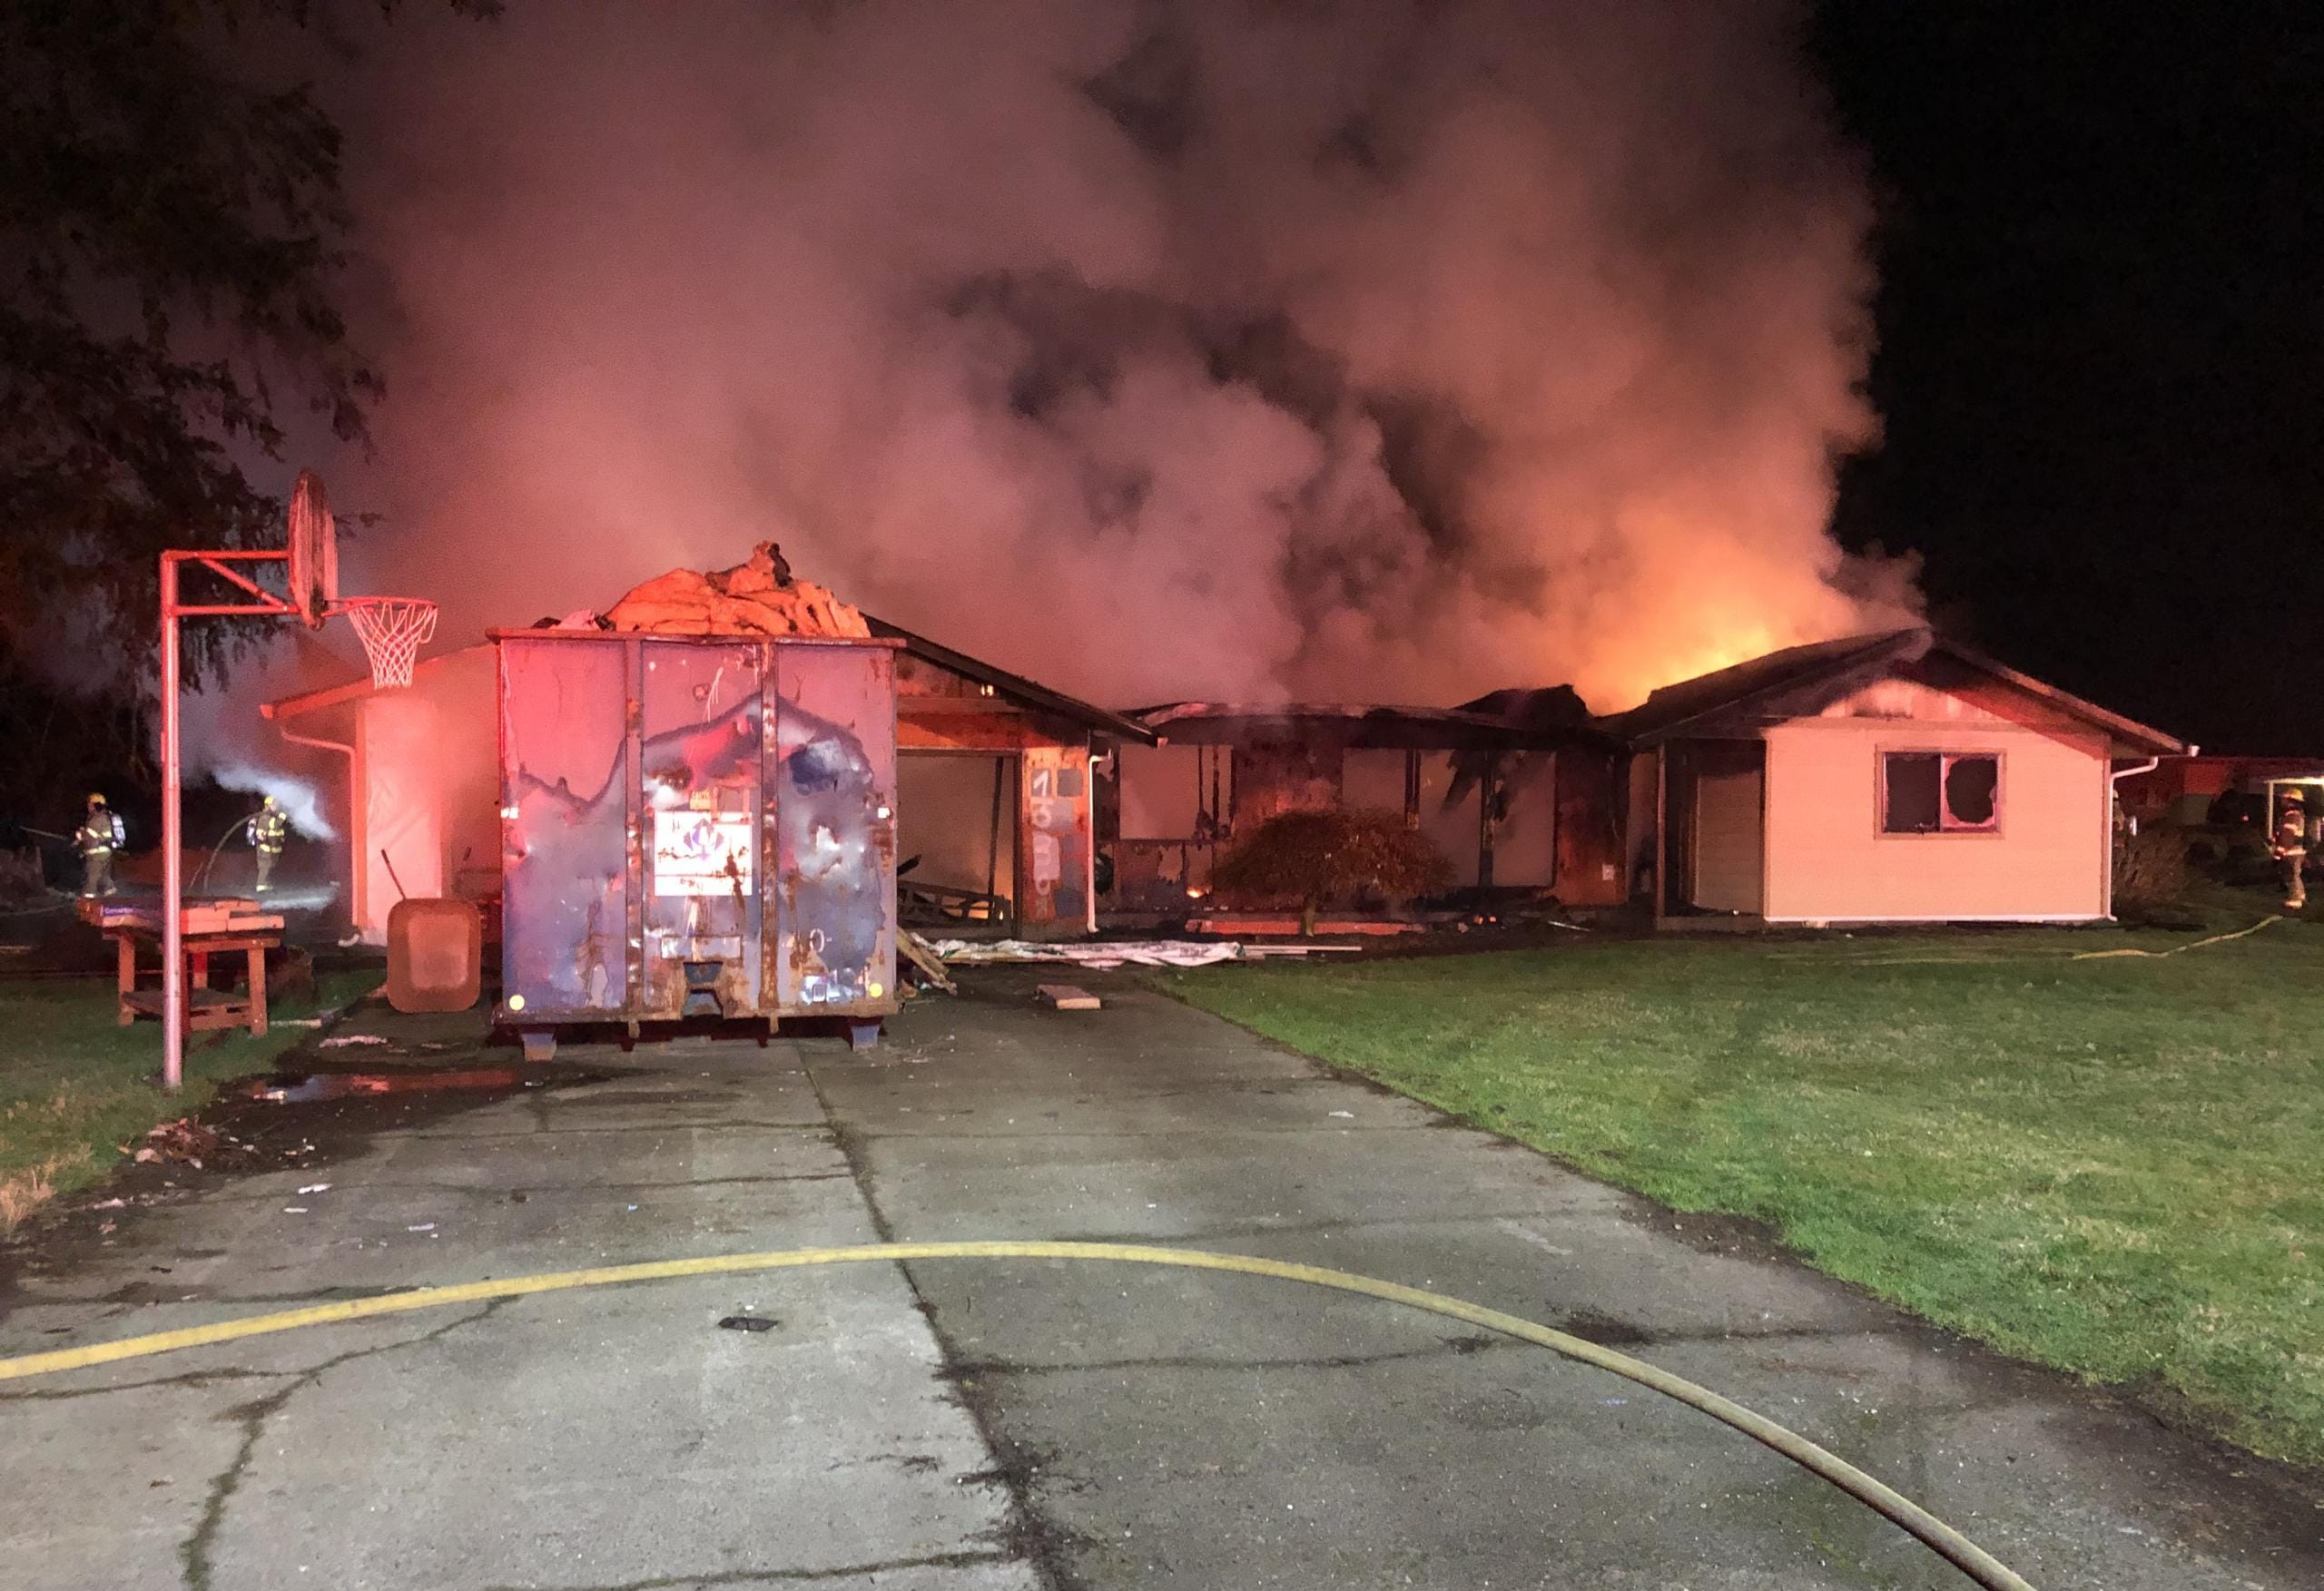 Clark County Fire & Rescue crews were dispatched at 3:43 a.m. Monday to the 10500 block of Northeast 269th Street for the report of a residential structure fire. The home was undergoing renovations; the homeowners were living elsewhere, according to the fire chief.